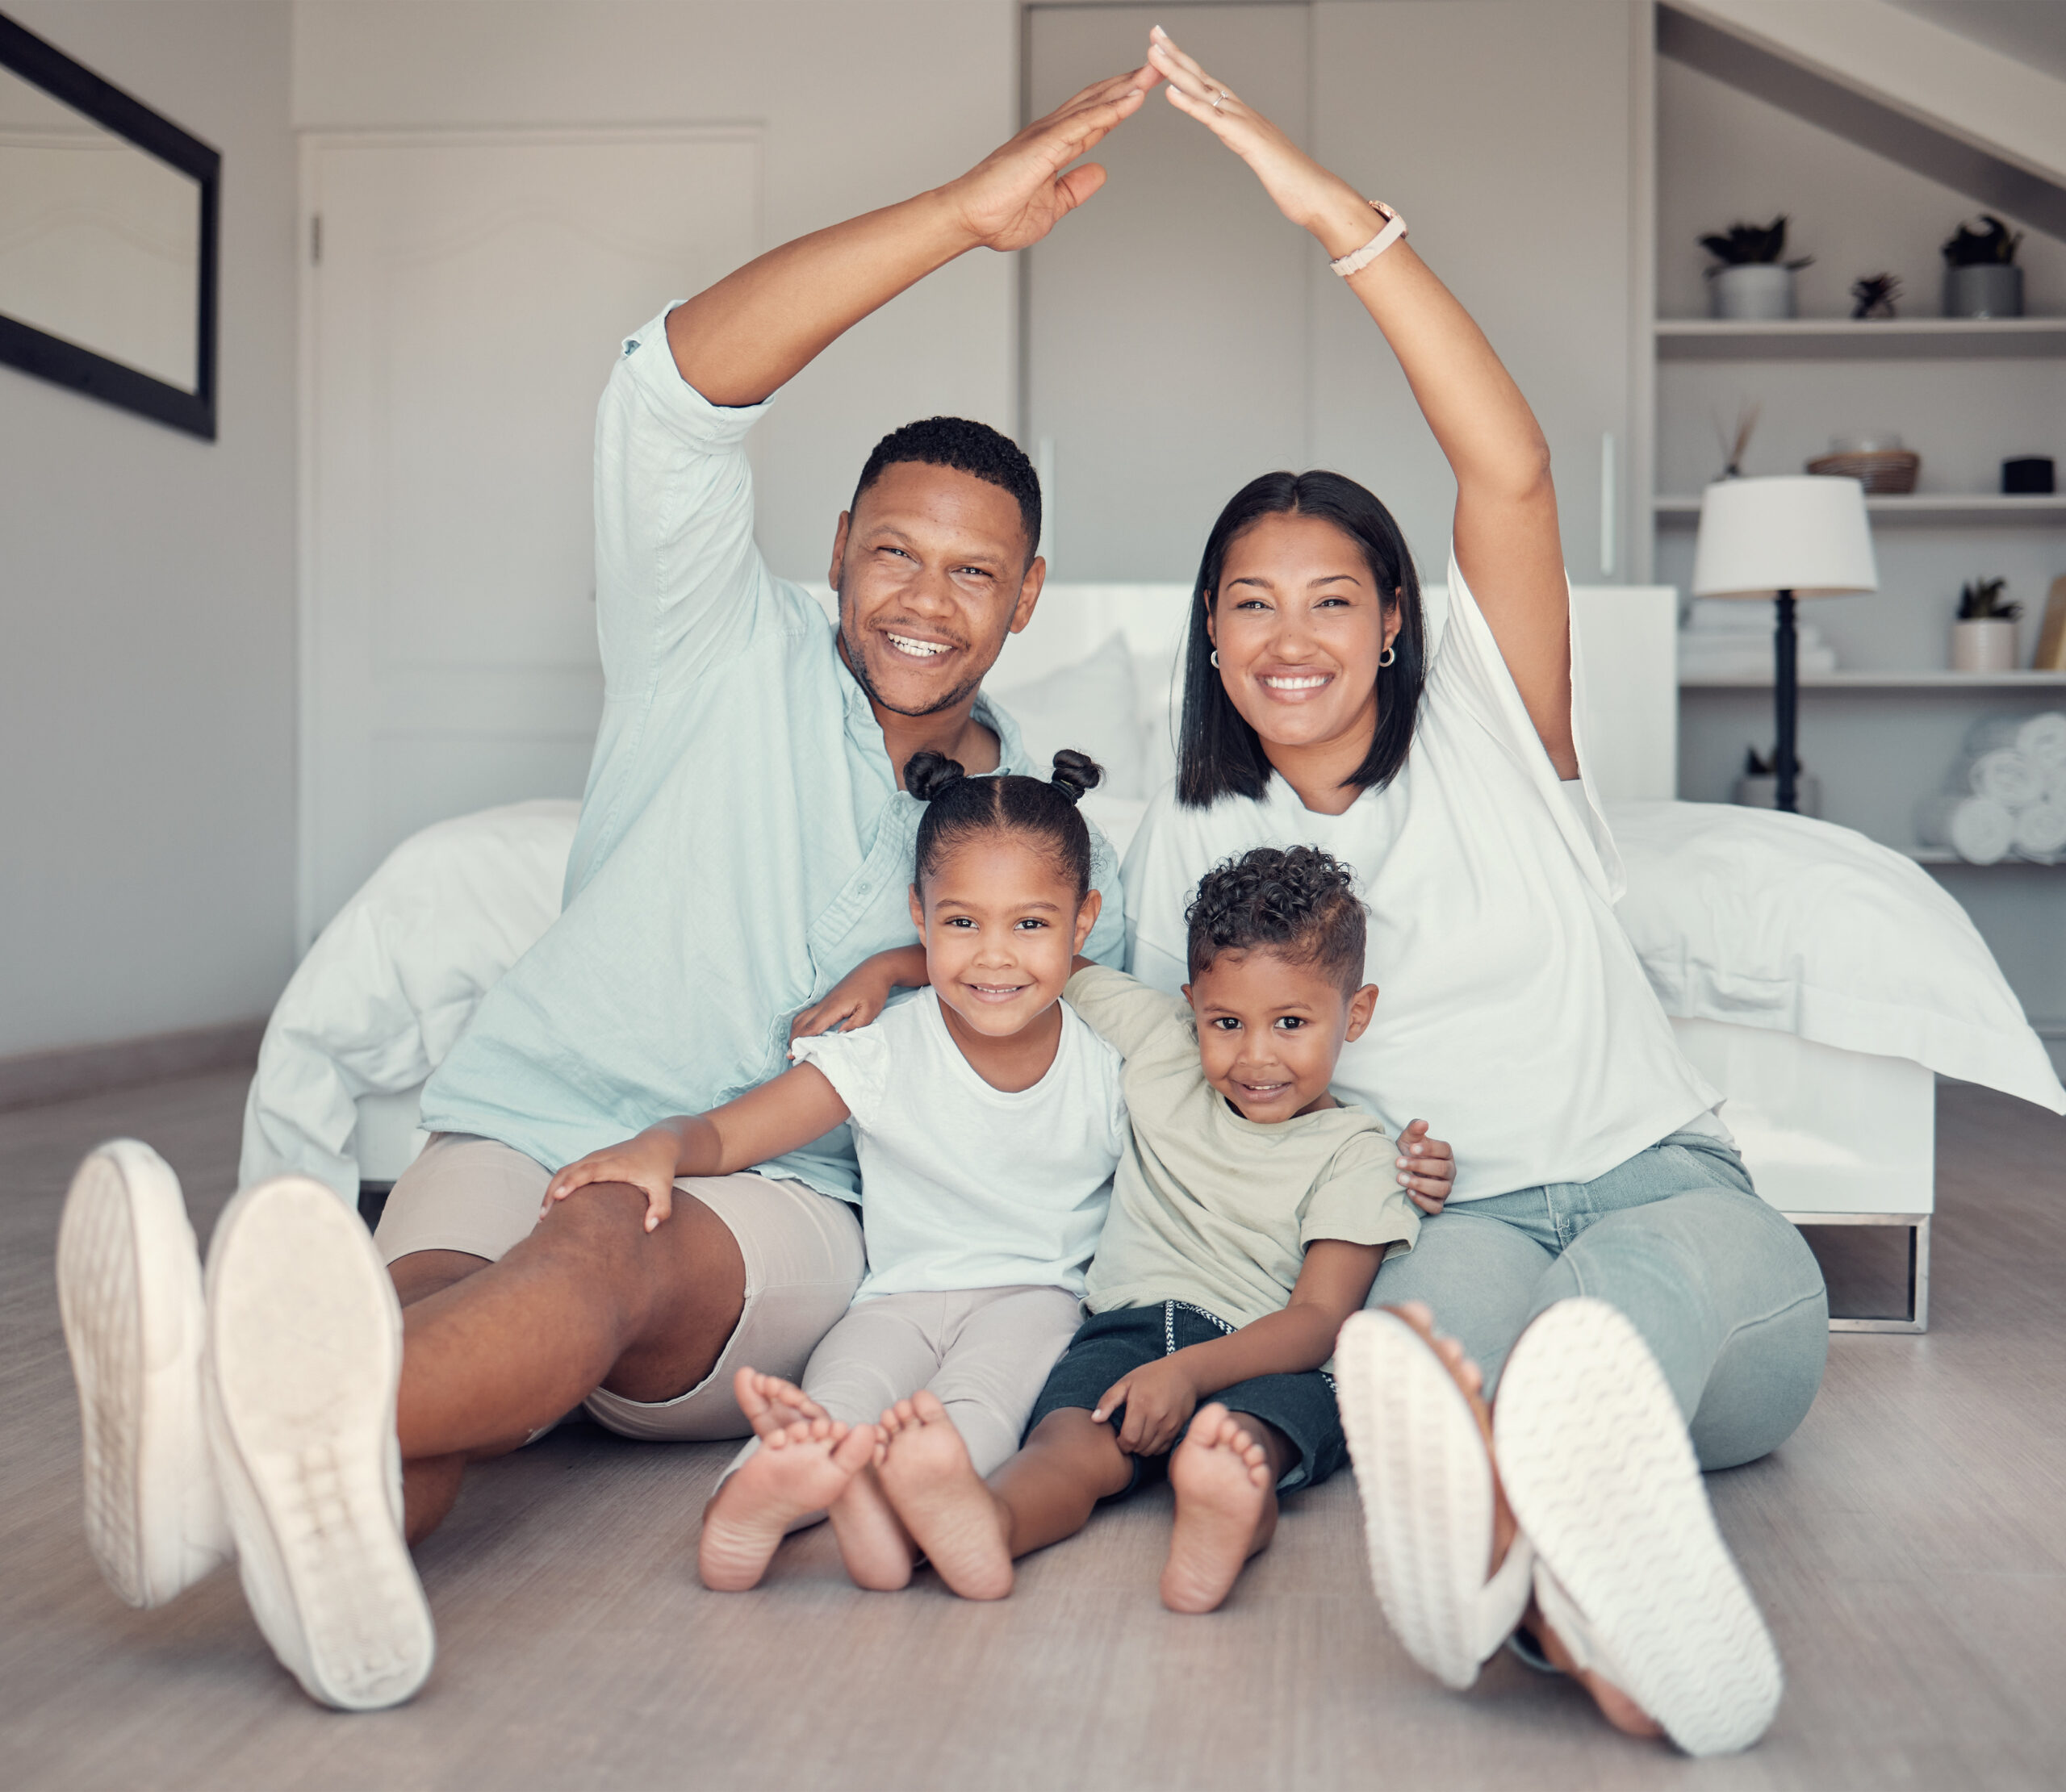 Family, roof and hands together for portrait on bedroom floor for insurance, support bonding and quality time. Security, protection and happy parents with children for love or safety in family home.